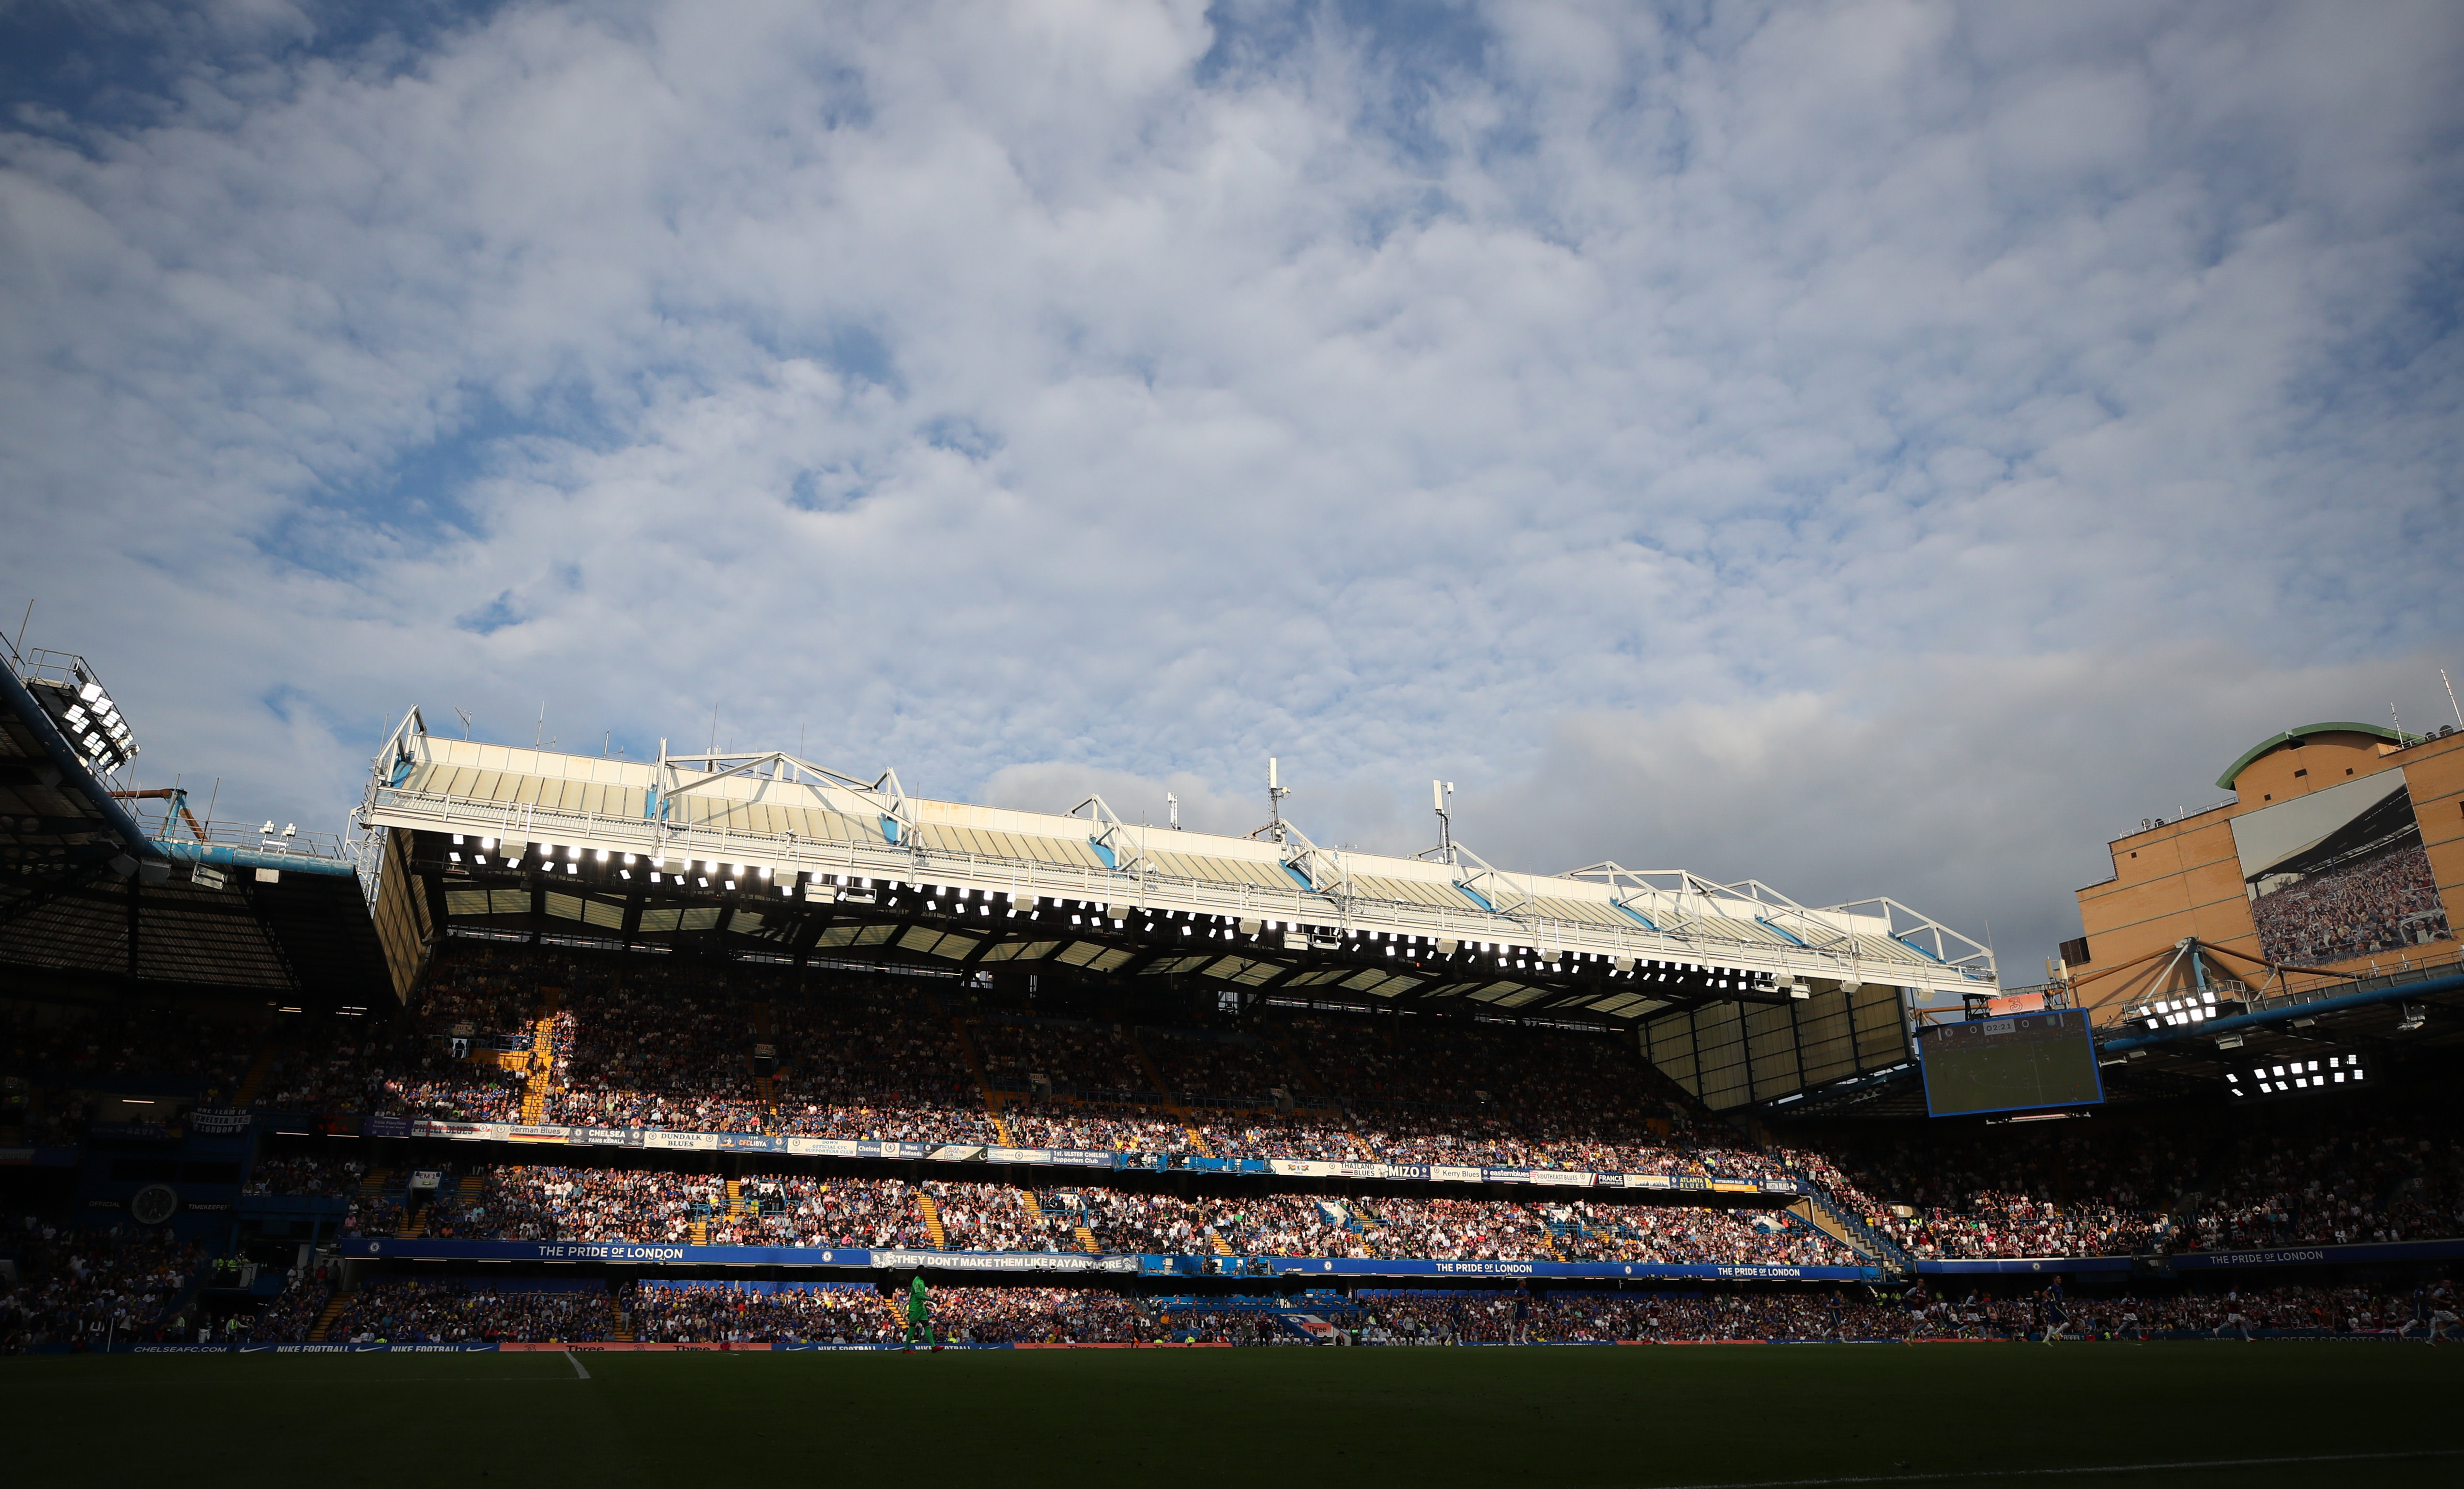 Chelsea FC on X: Good afternoon from a sunny Stamford Bridge. We